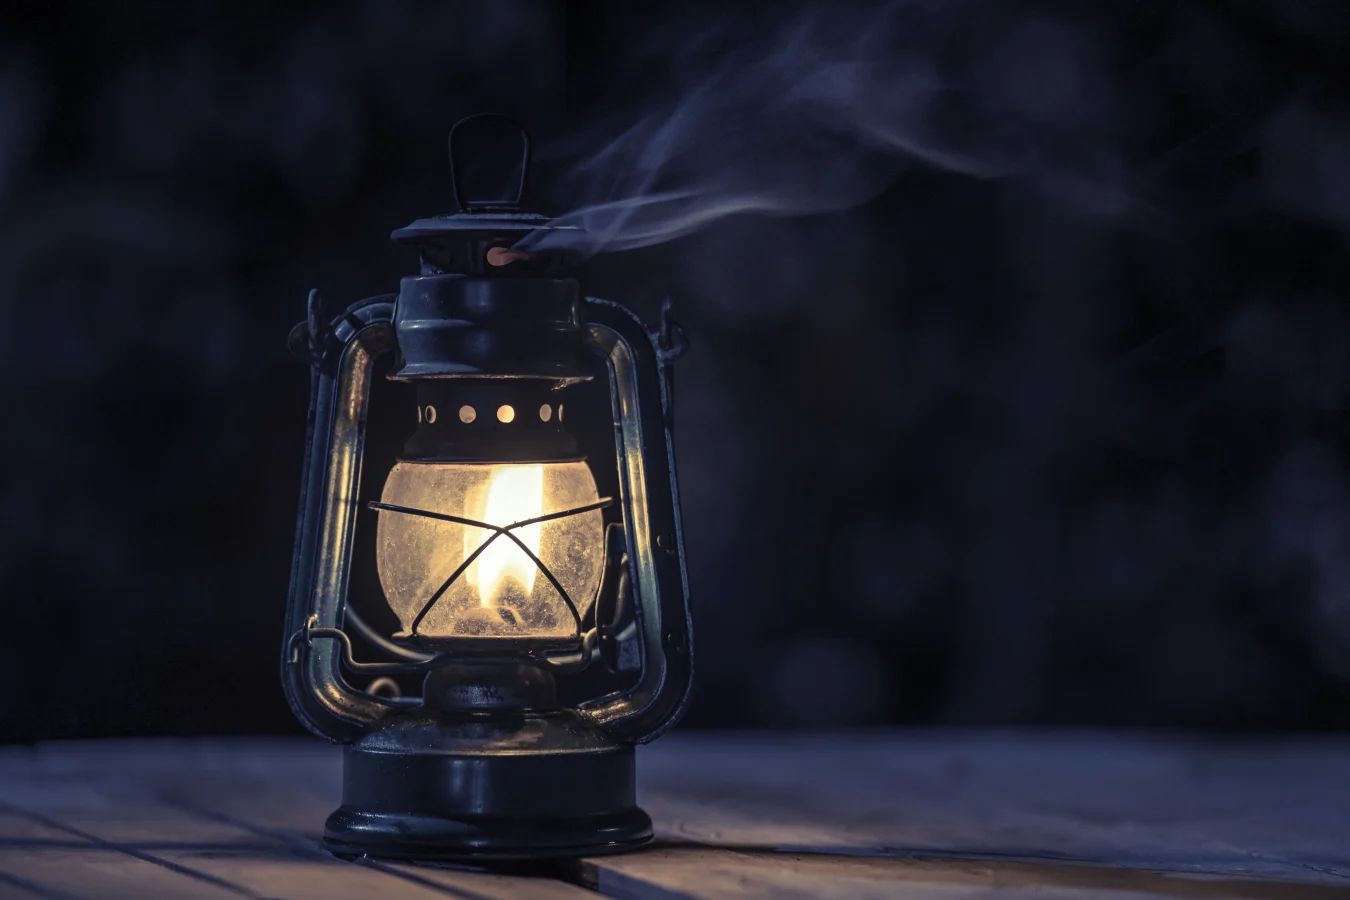 antique kerosene lamp with lights on the wooden floor on the lawn at night